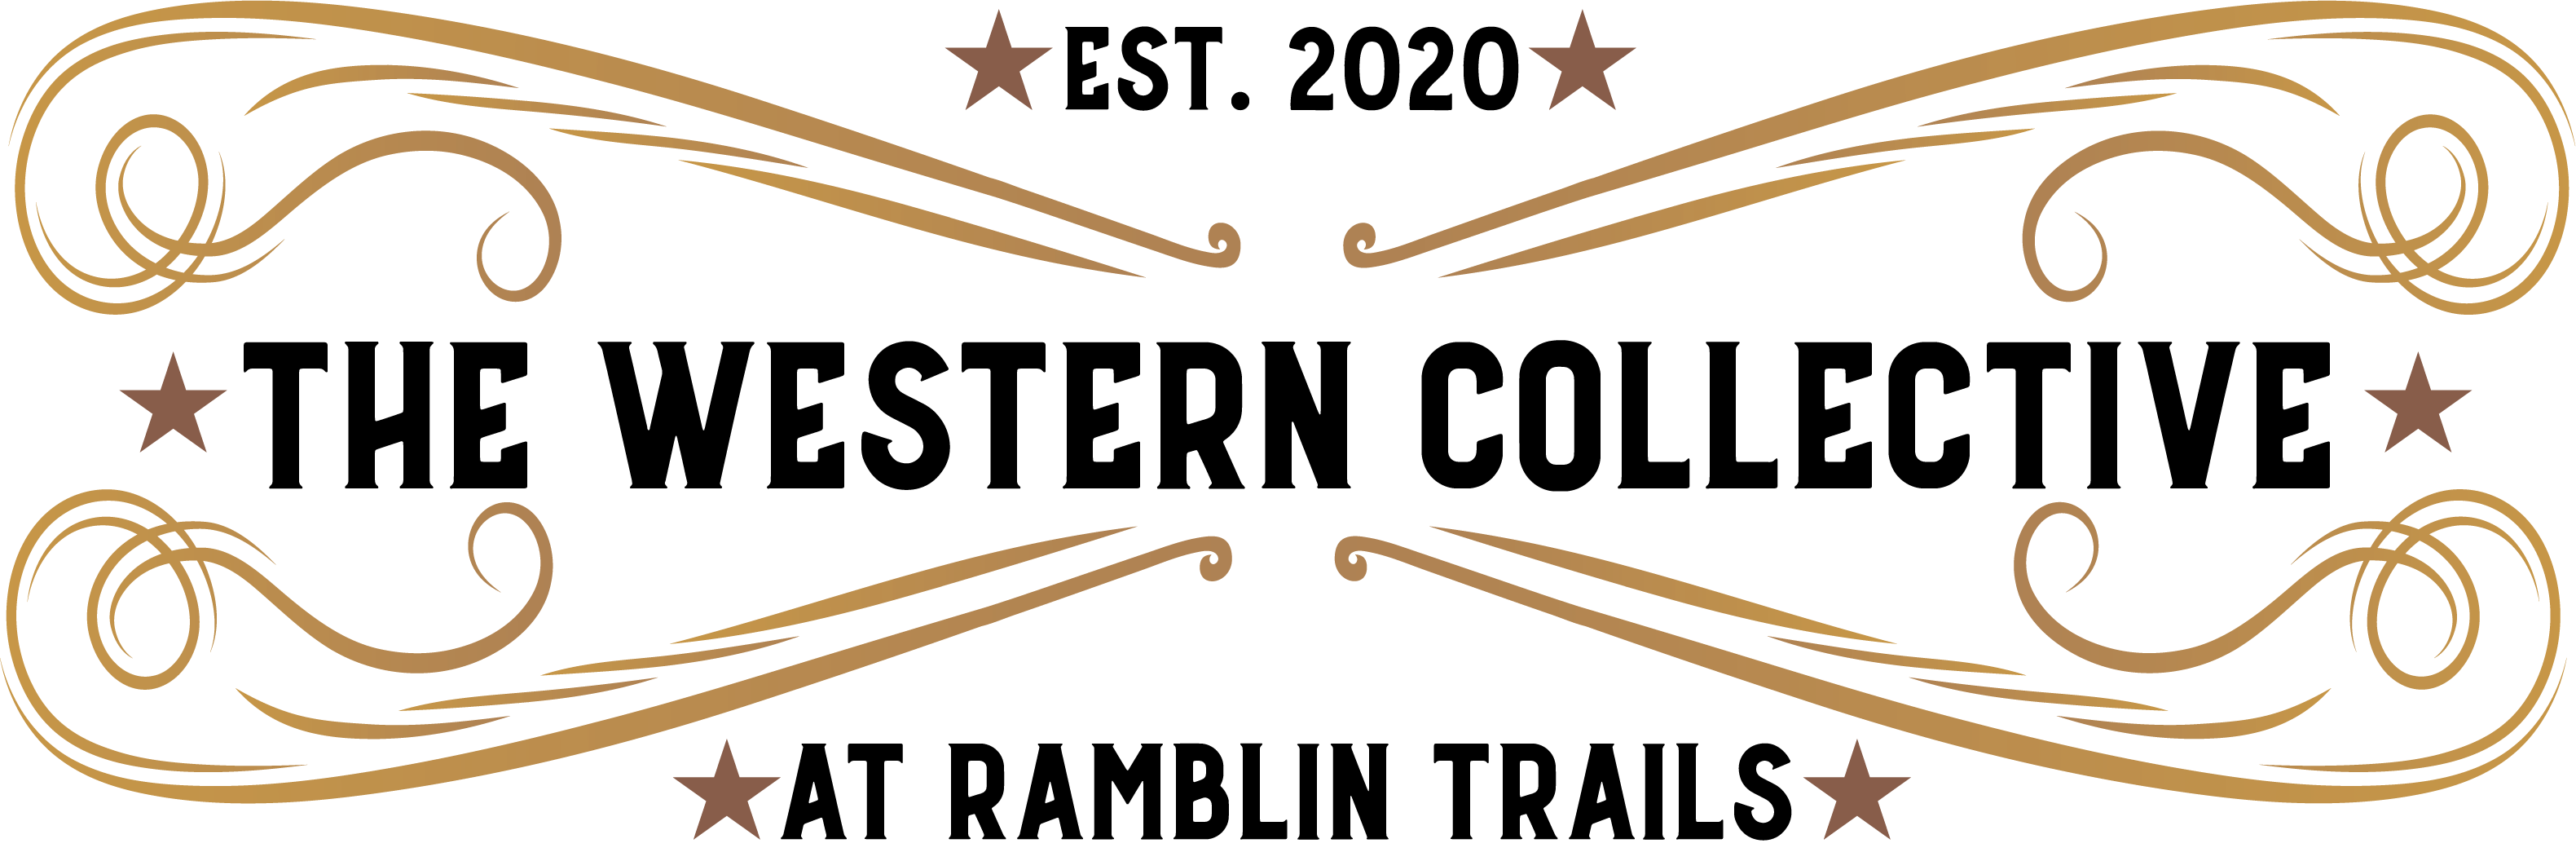 The Western Collective at Ramblin Trails